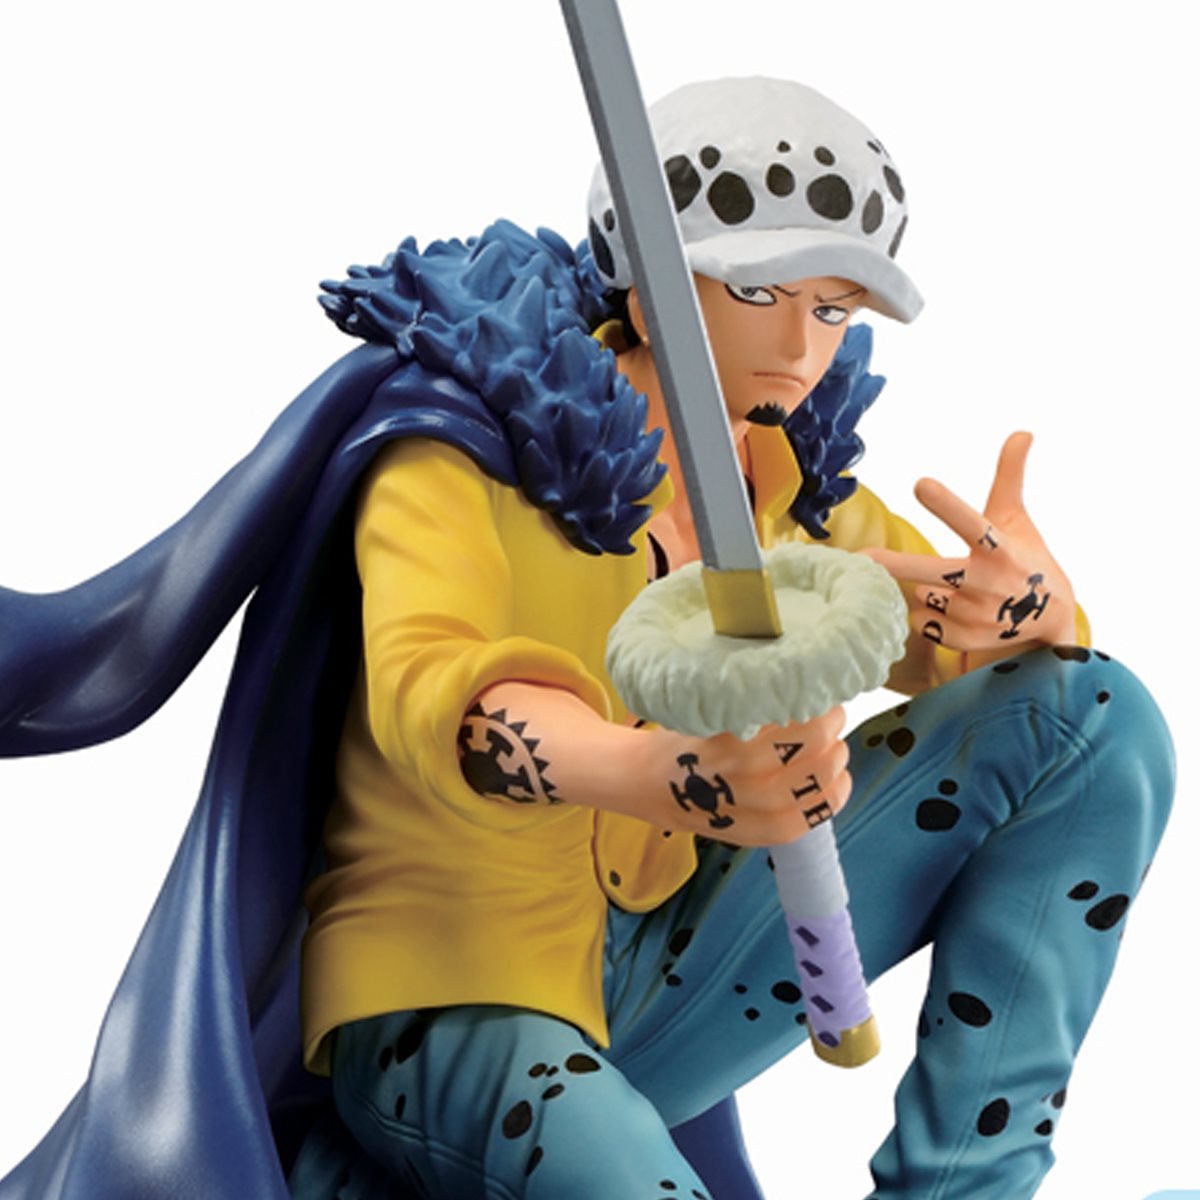 Anime Figure, Anime Characters One Piece Trafalgar D. Water Law PVC Action  Figure 17cm, Anime Fan Collection Model Statue : Amazon.co.uk: Toys & Games